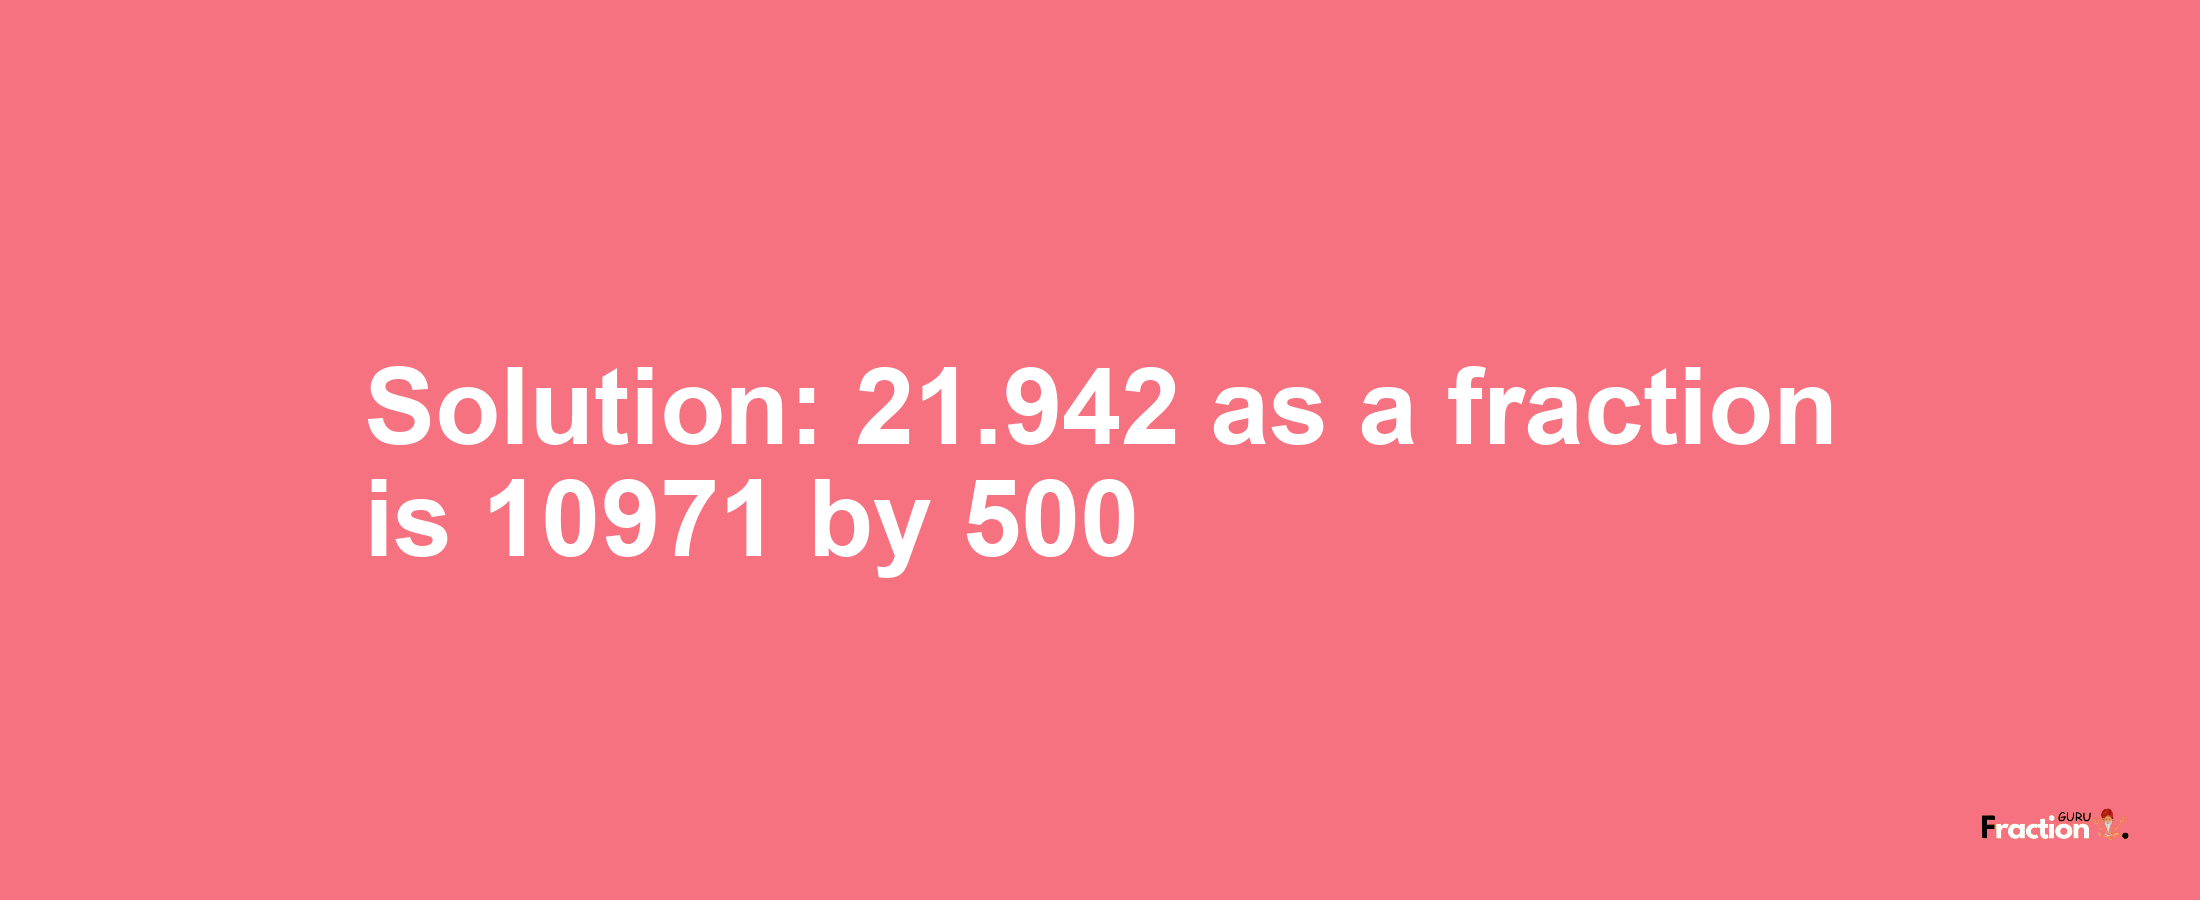 Solution:21.942 as a fraction is 10971/500